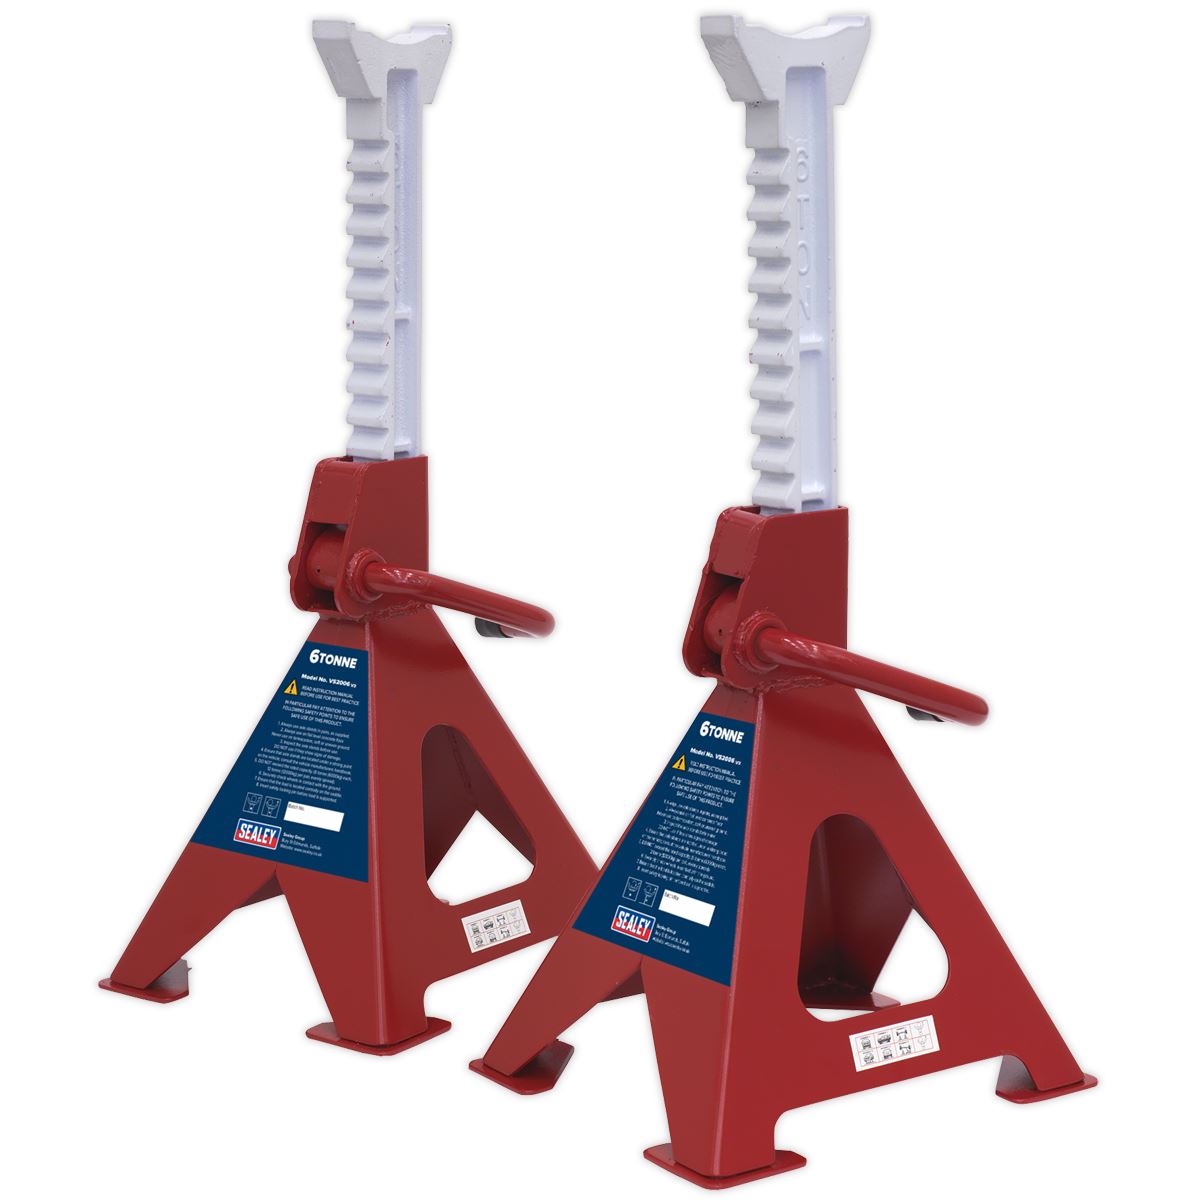 Sealey Axle Stands (Pair) 6tonne Capacity per Stand Ratchet Type